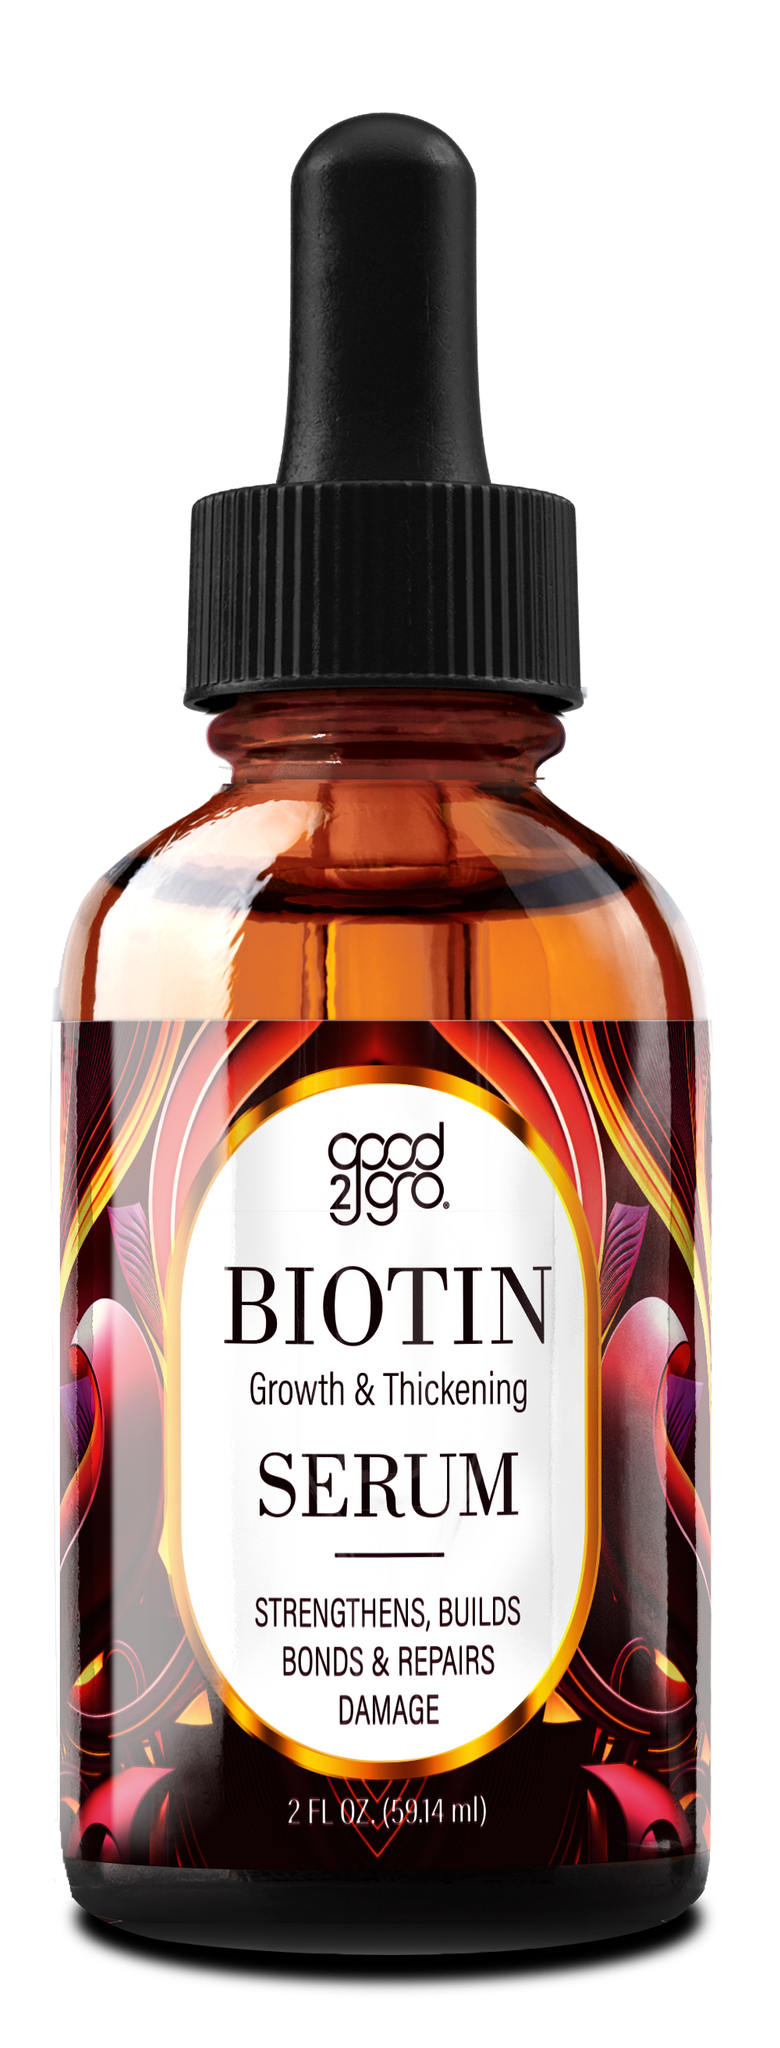 Good2Gro Growth & Thickening Serum, with Biotin & Collagen, Helps Hair Regeneration, Improves Thinning & Hair Loss, Hydrates, Conditions, Repairs Restores & Protects 2oz.